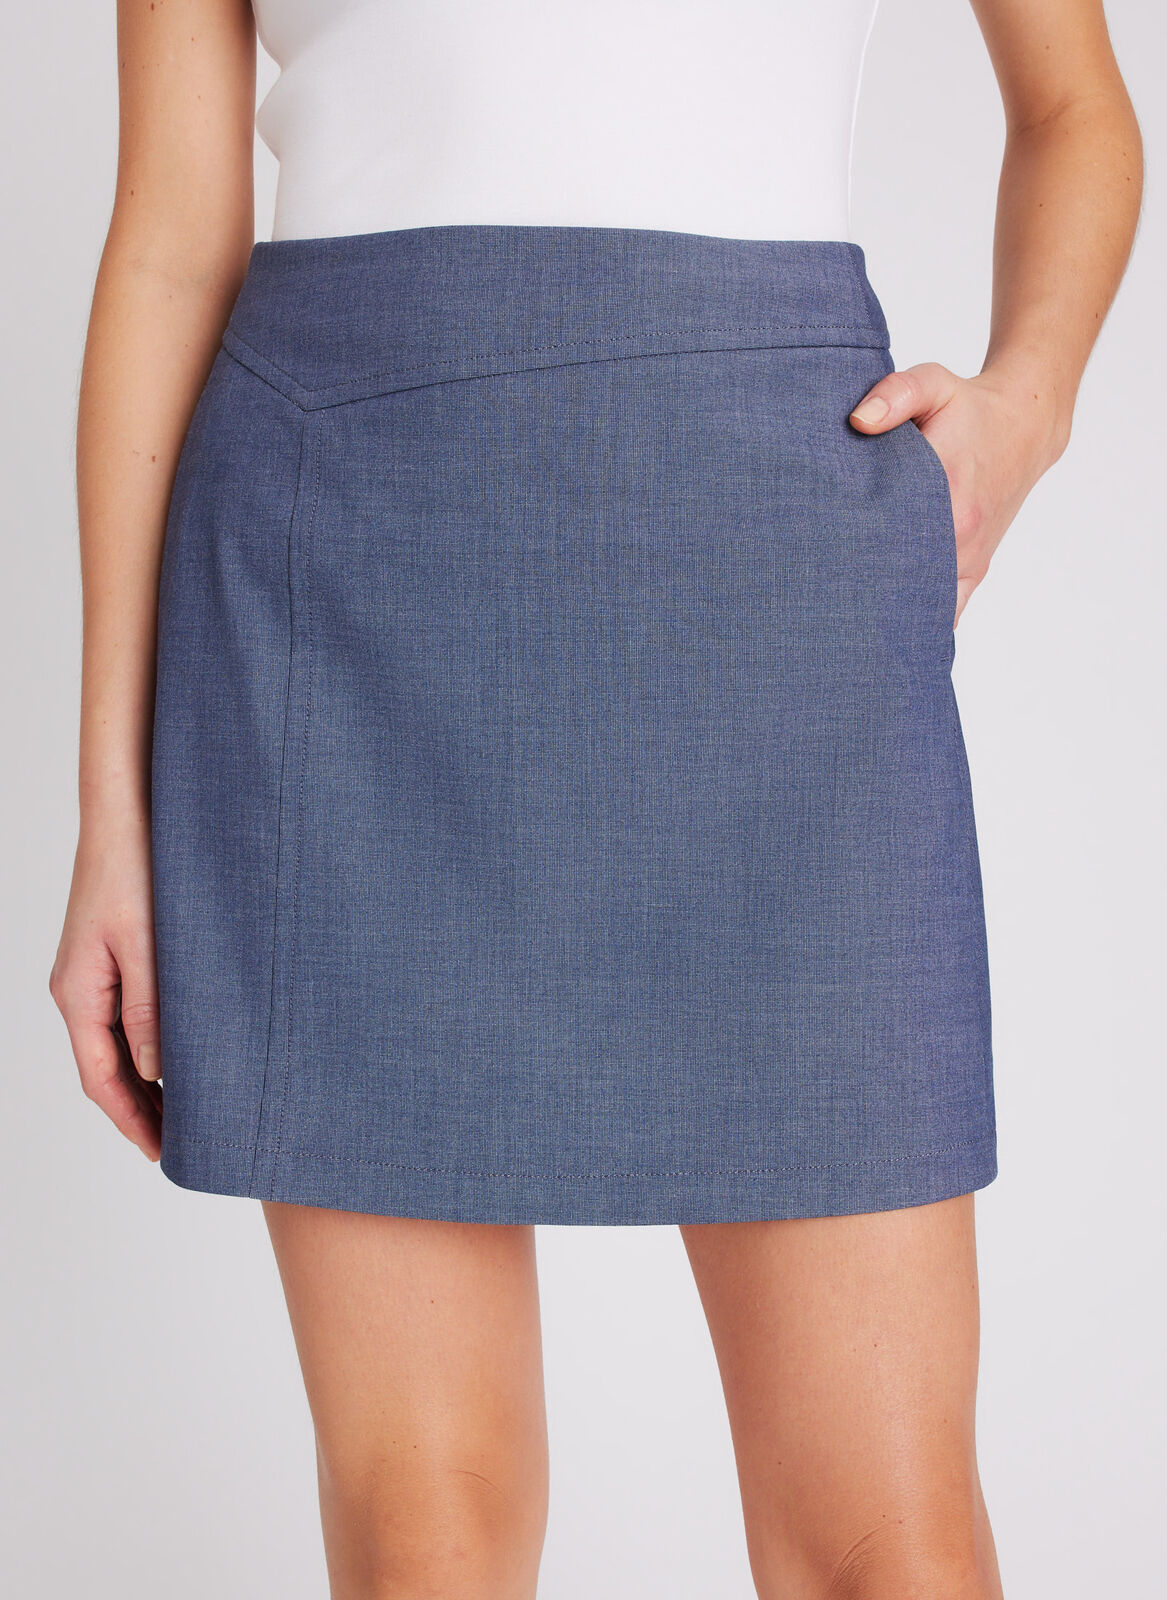 Seymour Short Skirt | Women's Shorts and Skirts – Kit and Ace